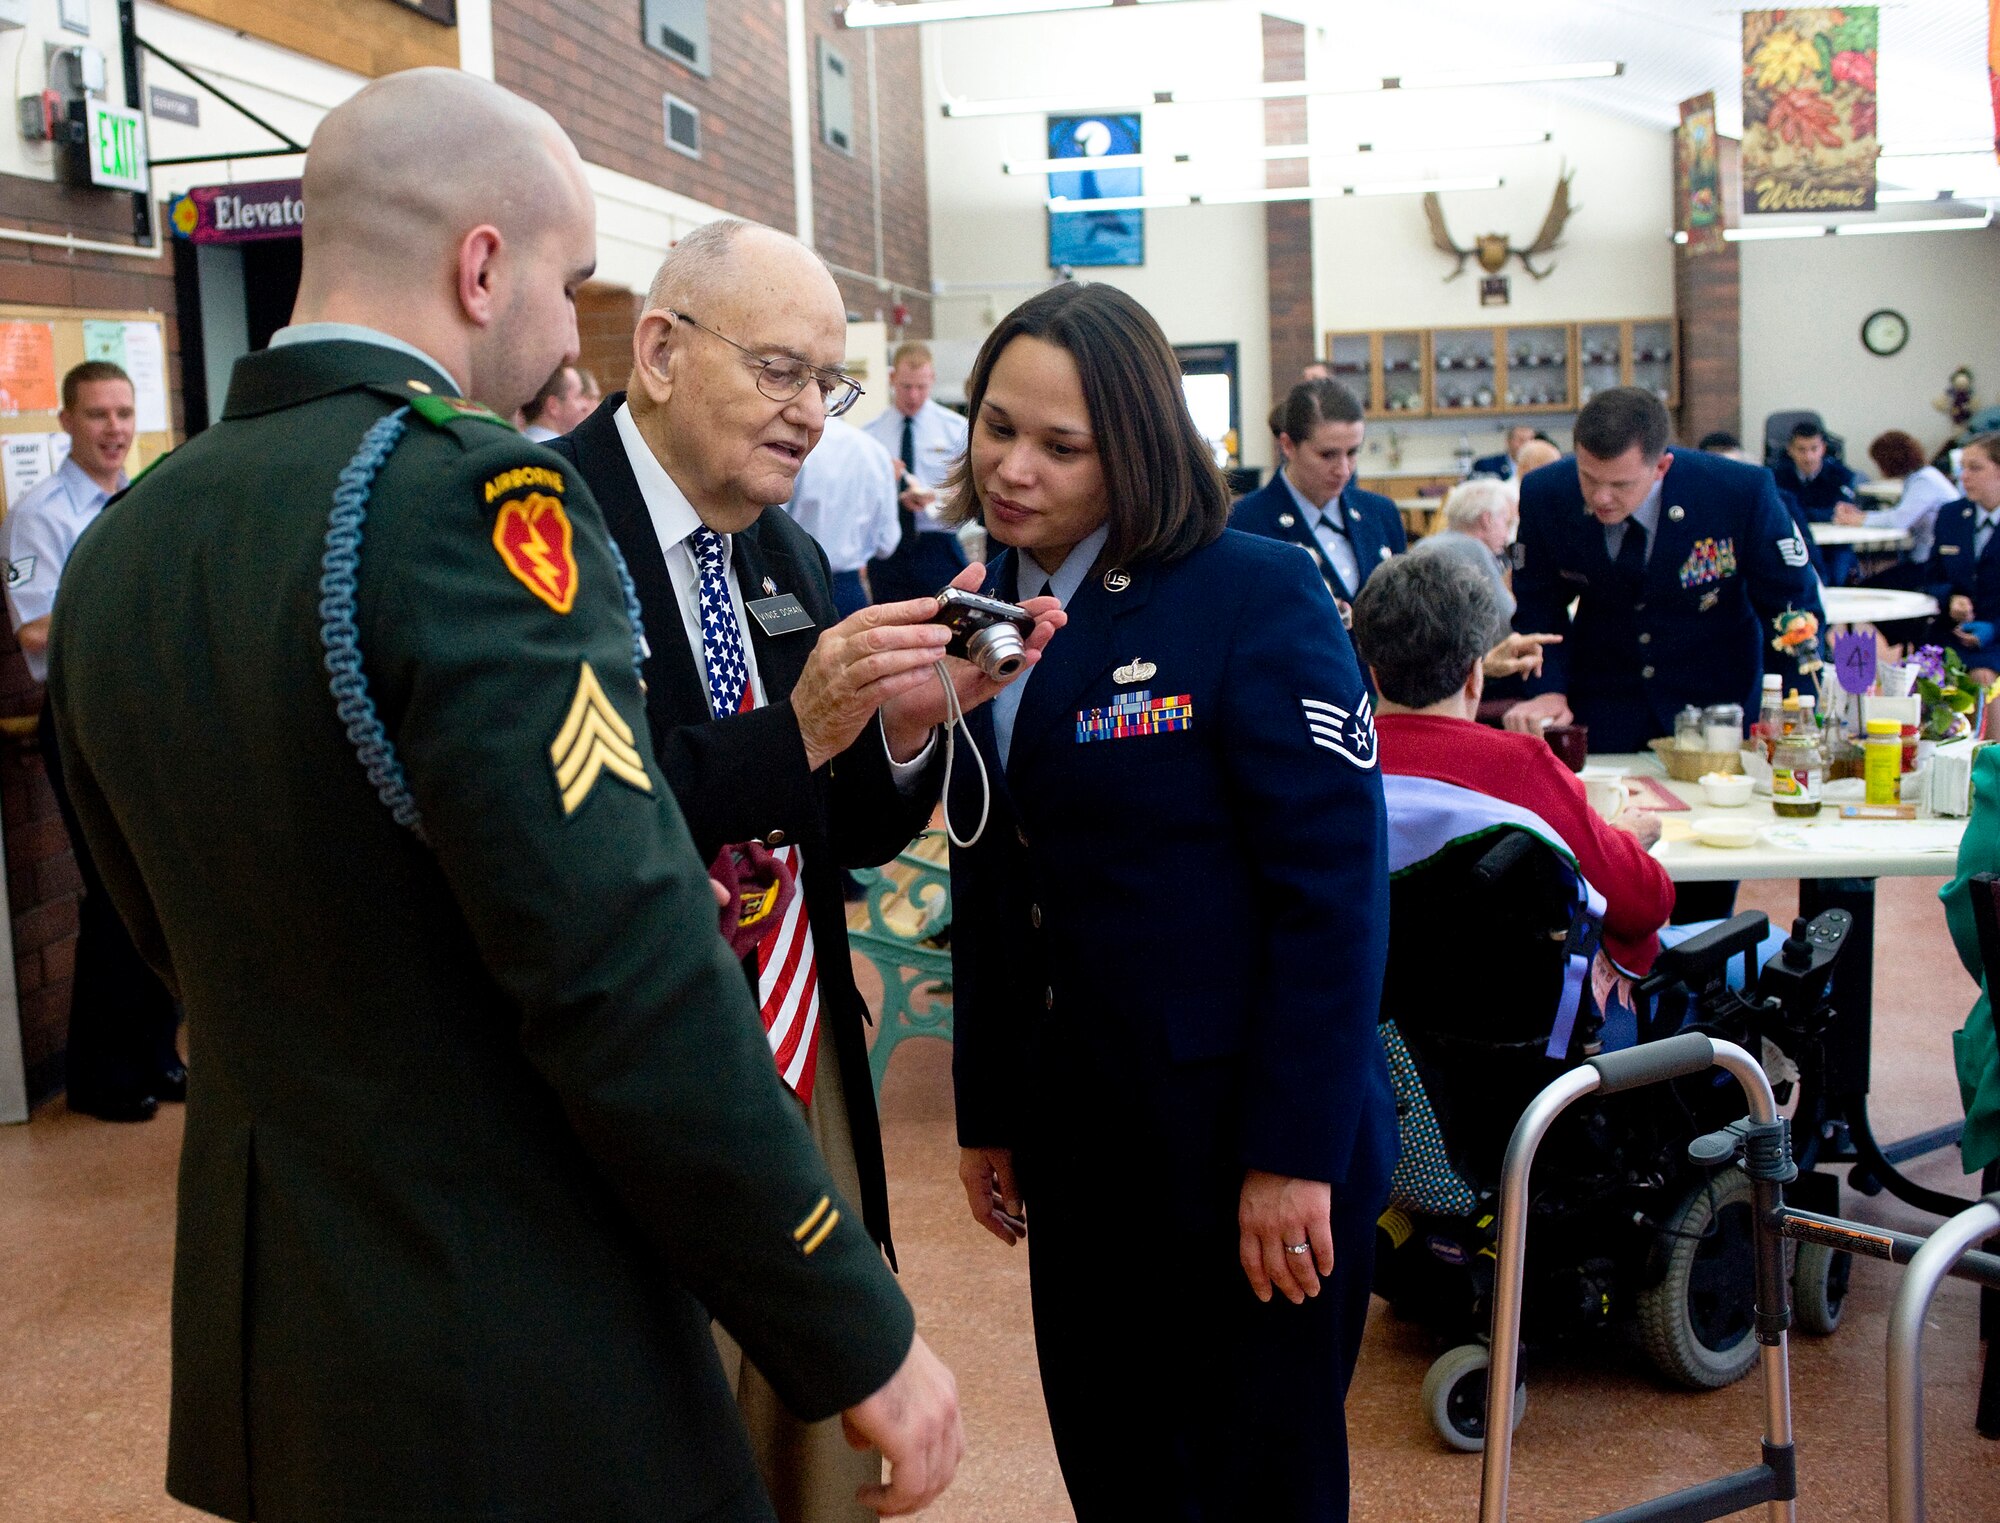 ANCHORAGE, Alaska -- Army Sgt. Michael Albright and Staff Sgt. Mary Albright look at a photo with Vince Doran, a World War II veteran, at Anchorage Pioneer Home Nov. 7. Arctic Warriors spent some time with veterans to socialize and eat ice cream. (U.S. Air Force photo/Senior Airman Jonathan Steffen)